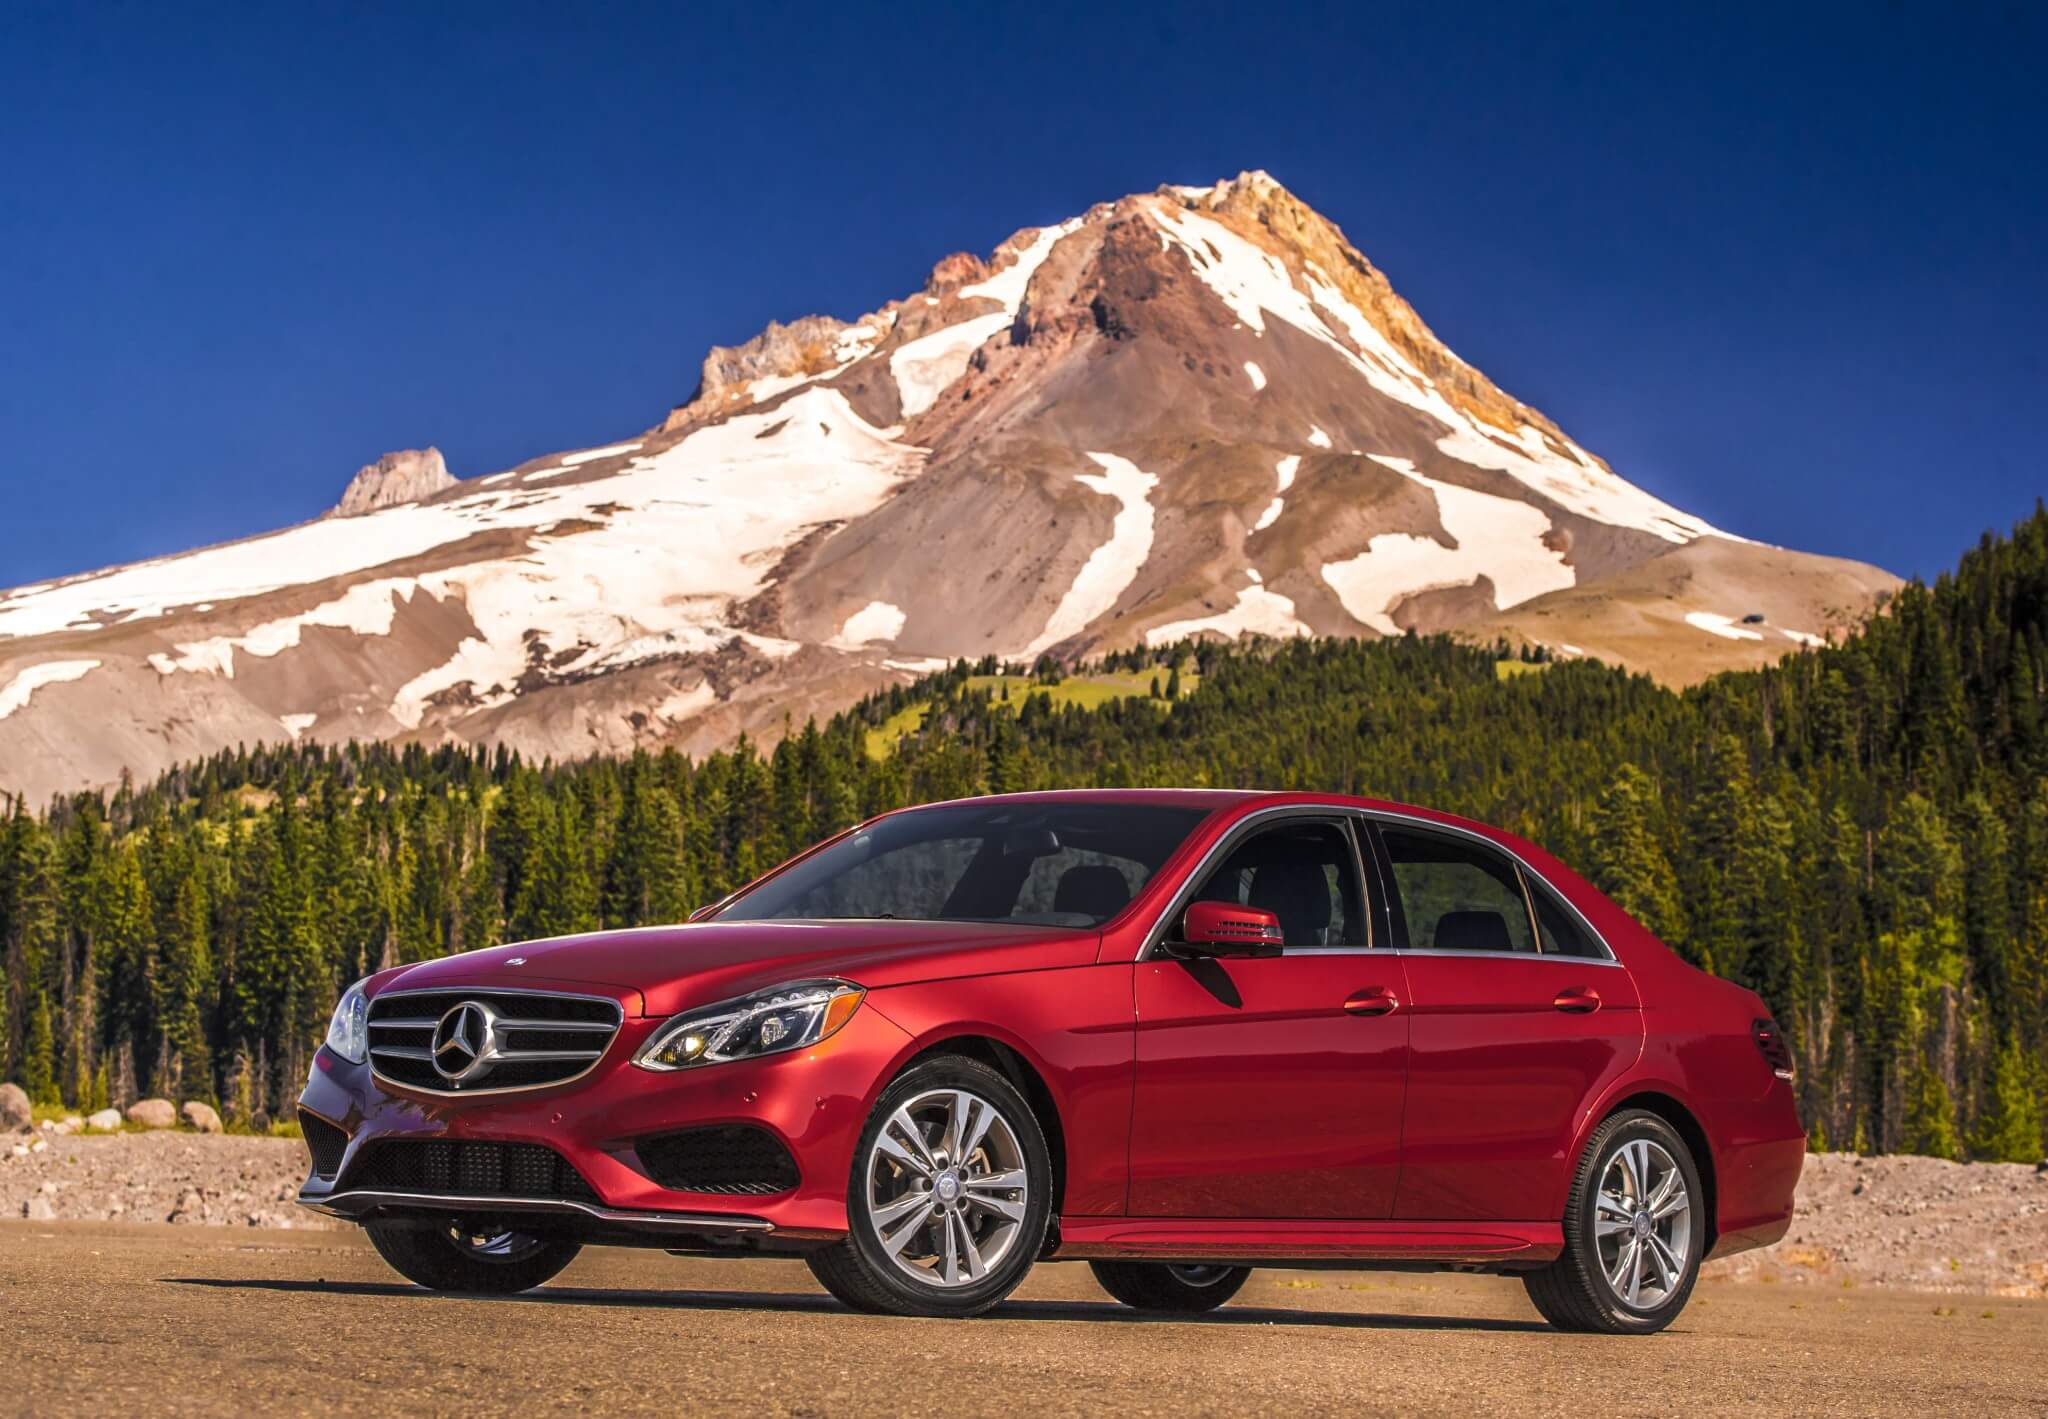 The E250 BlueTEC is one of Mercedes-Benz’s most recent diesel-powered cars to hit the market. It offers an EPA rating of 28 city/42 highway and all the luxury you’ve come to expect from a Mercedes-Benz.